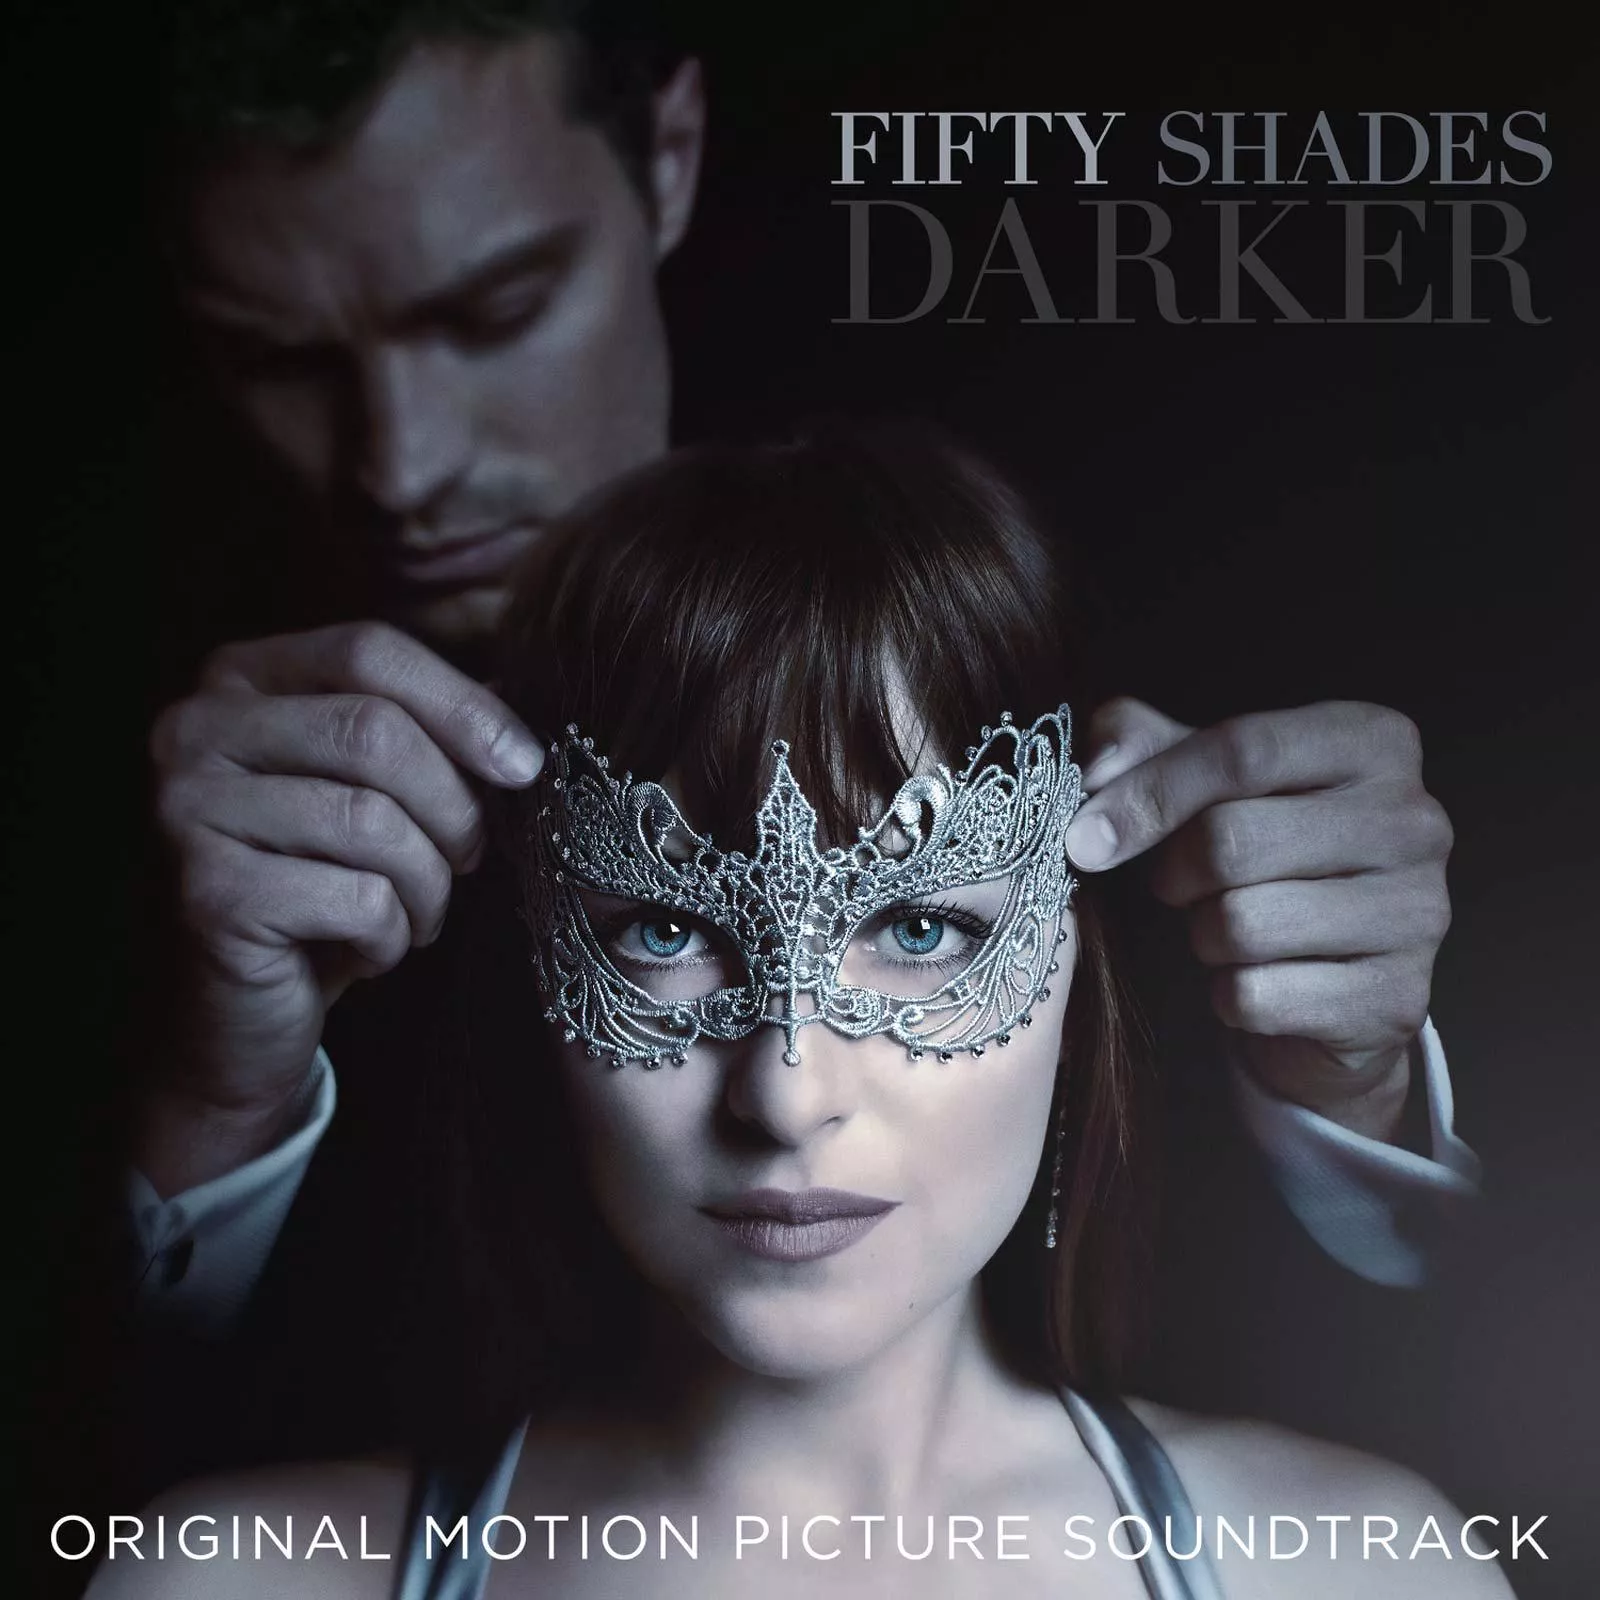 Fifty Shades Darker (Original Motion Picture Soundtrack) - Diverse